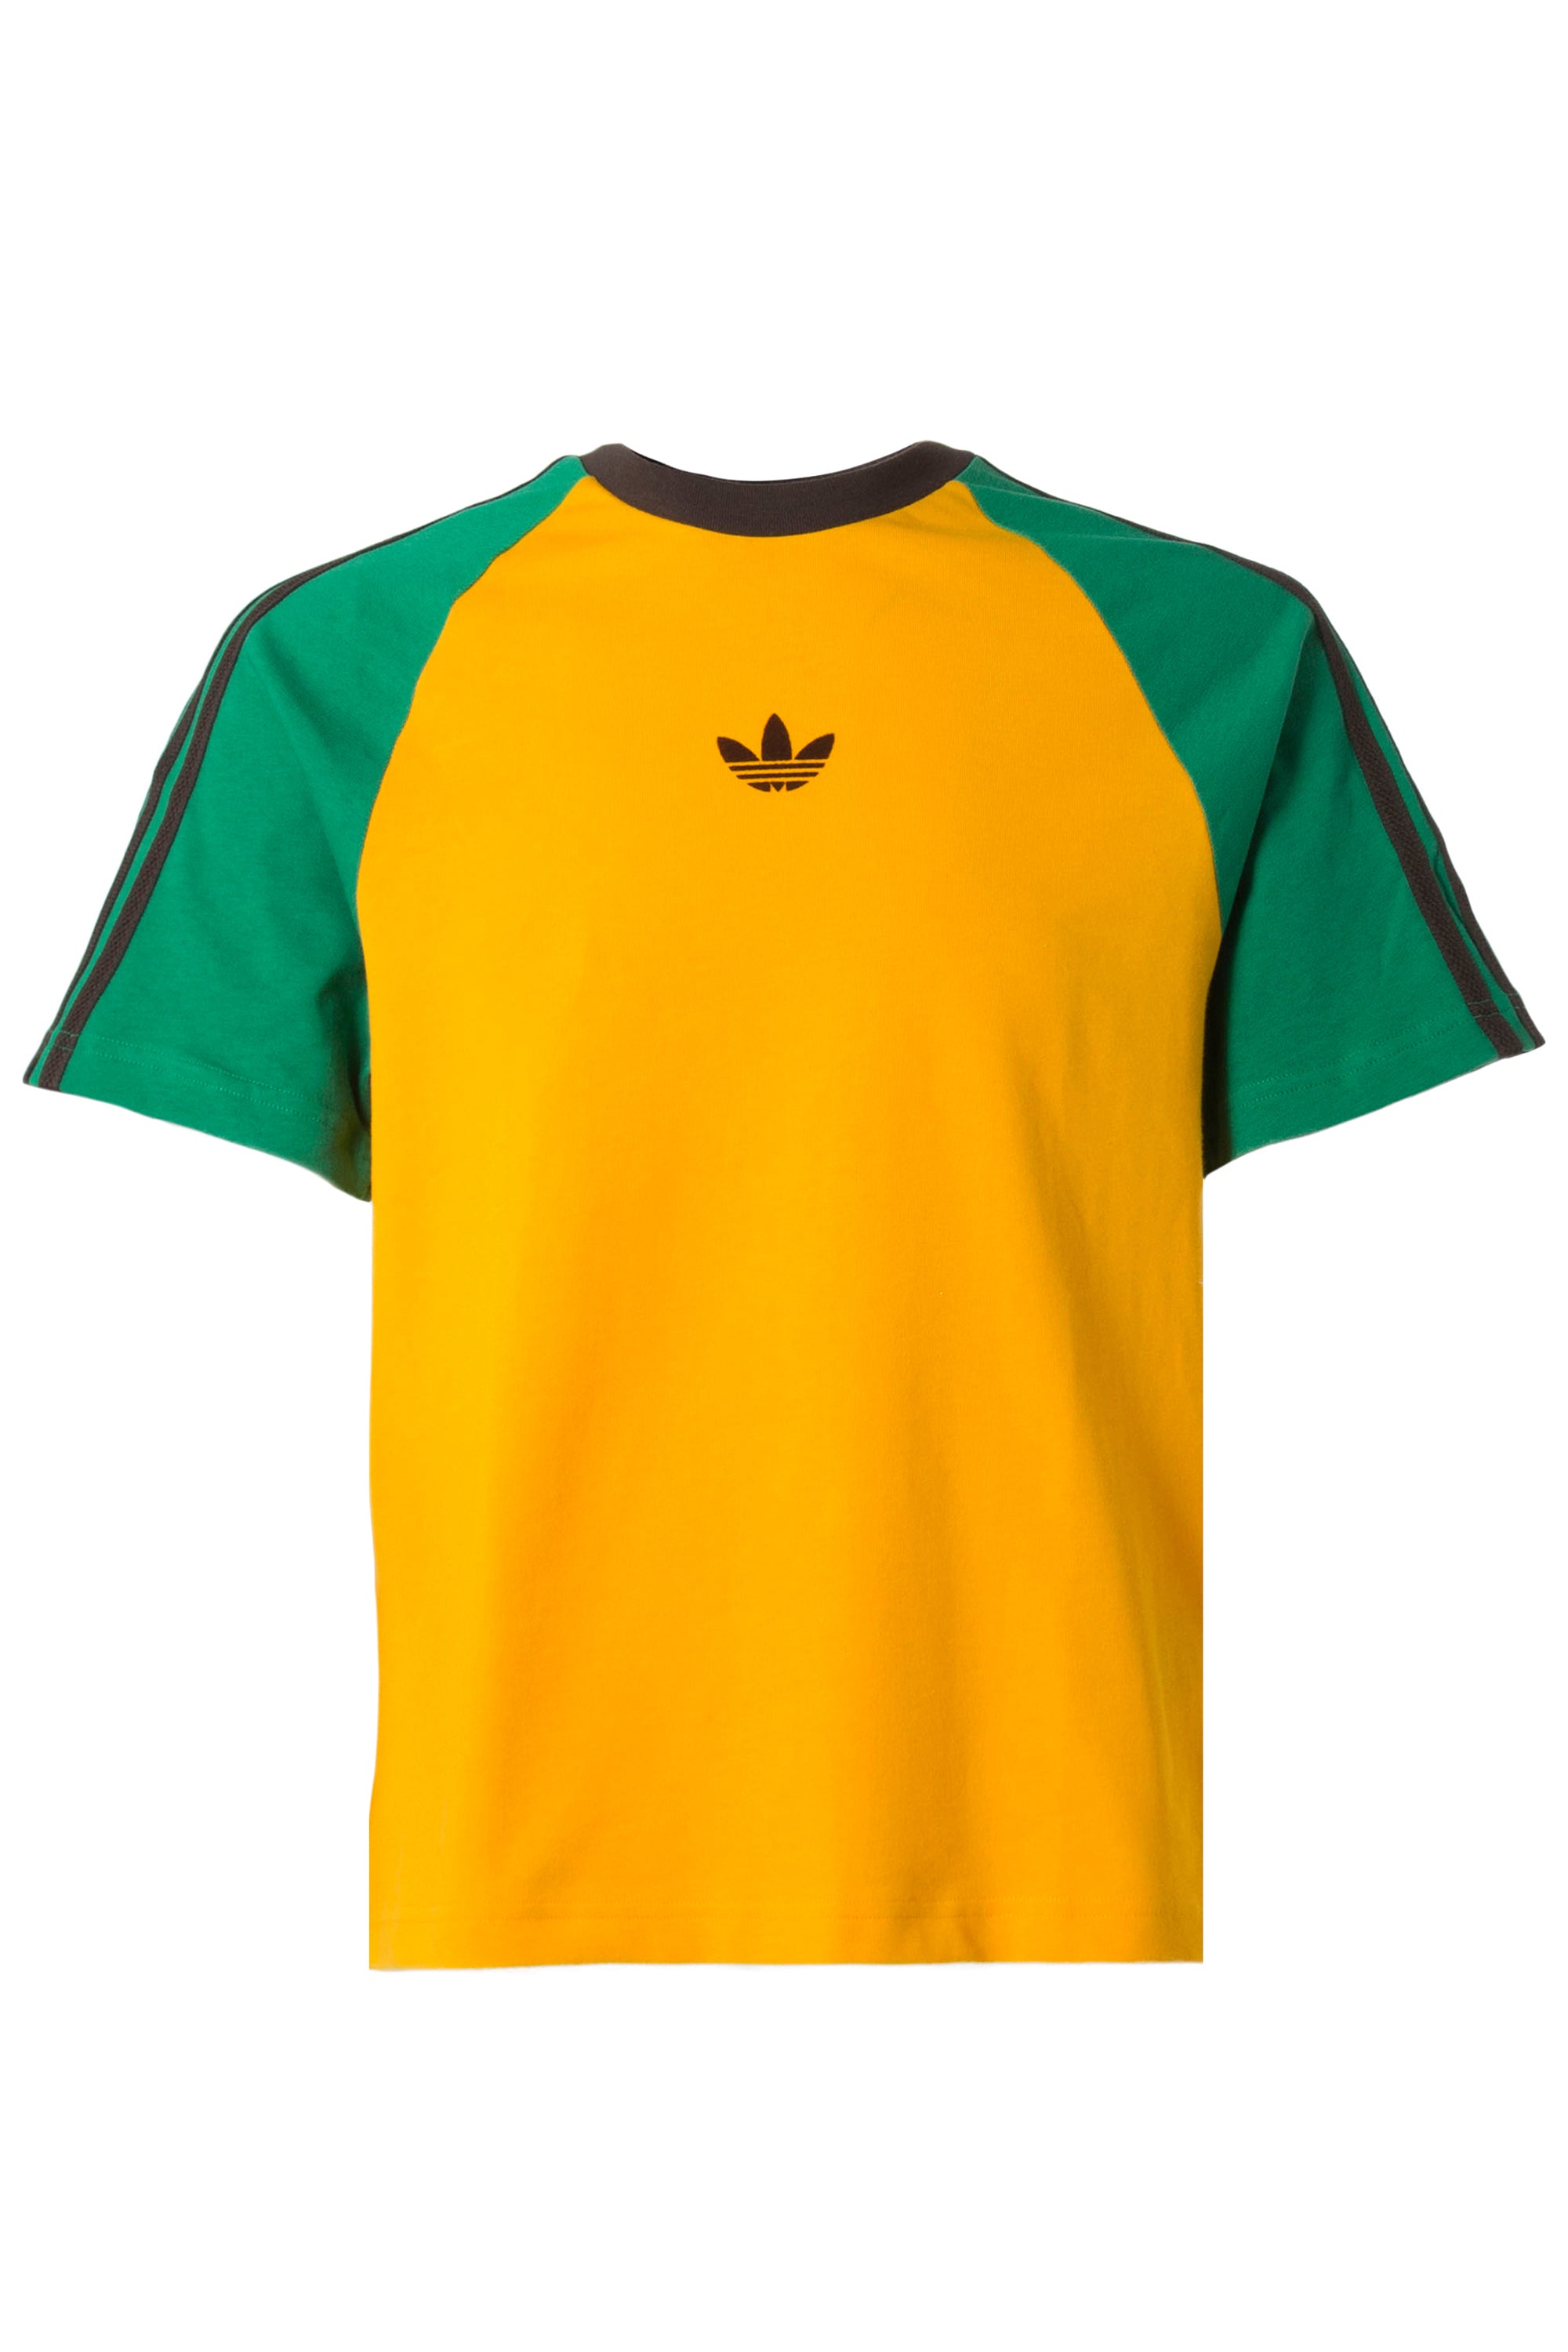 adidas×Wales Bonner SS23 WB S/S TEE / COLLEGIATE GOLD